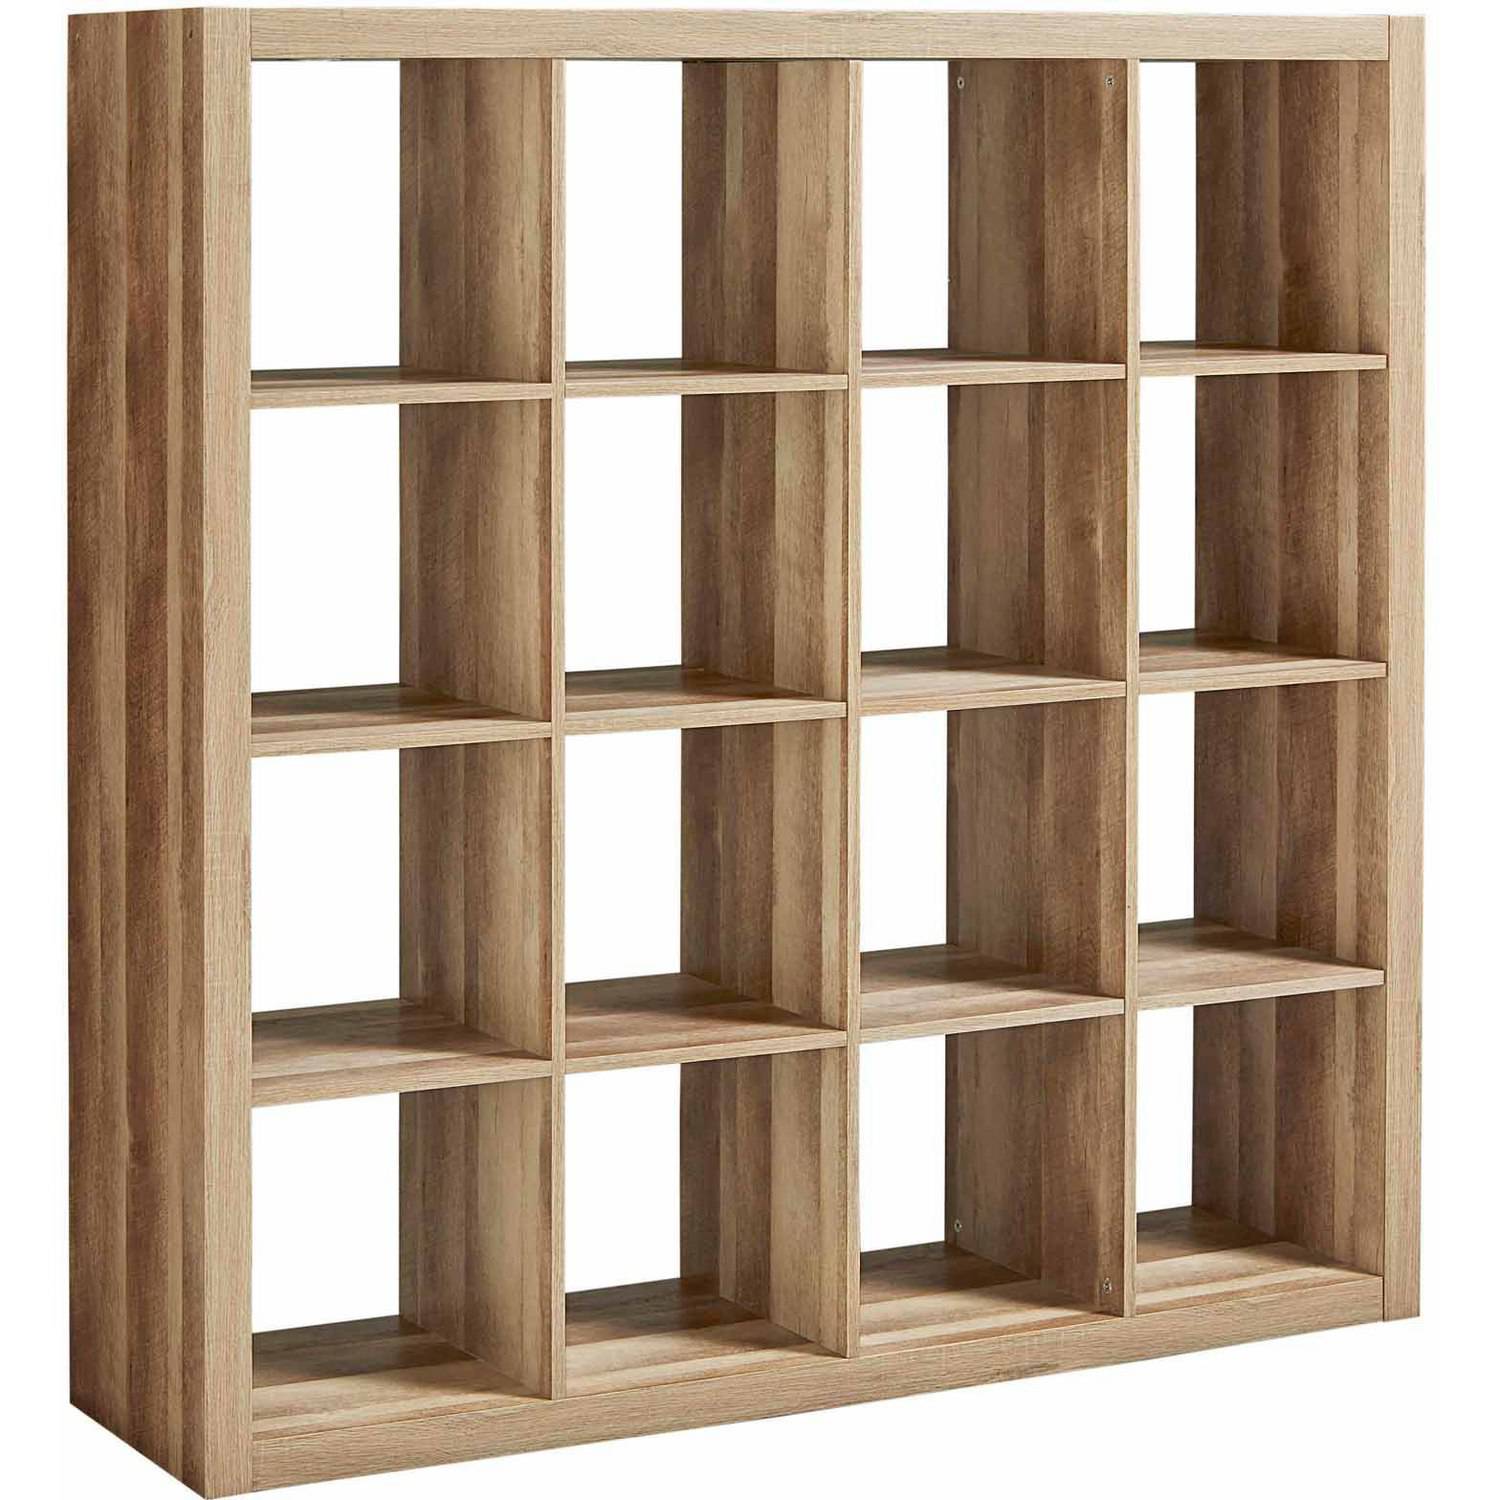 Better Homes & Gardens 16-Cube Storage Organizer, Weathered - image 1 of 4